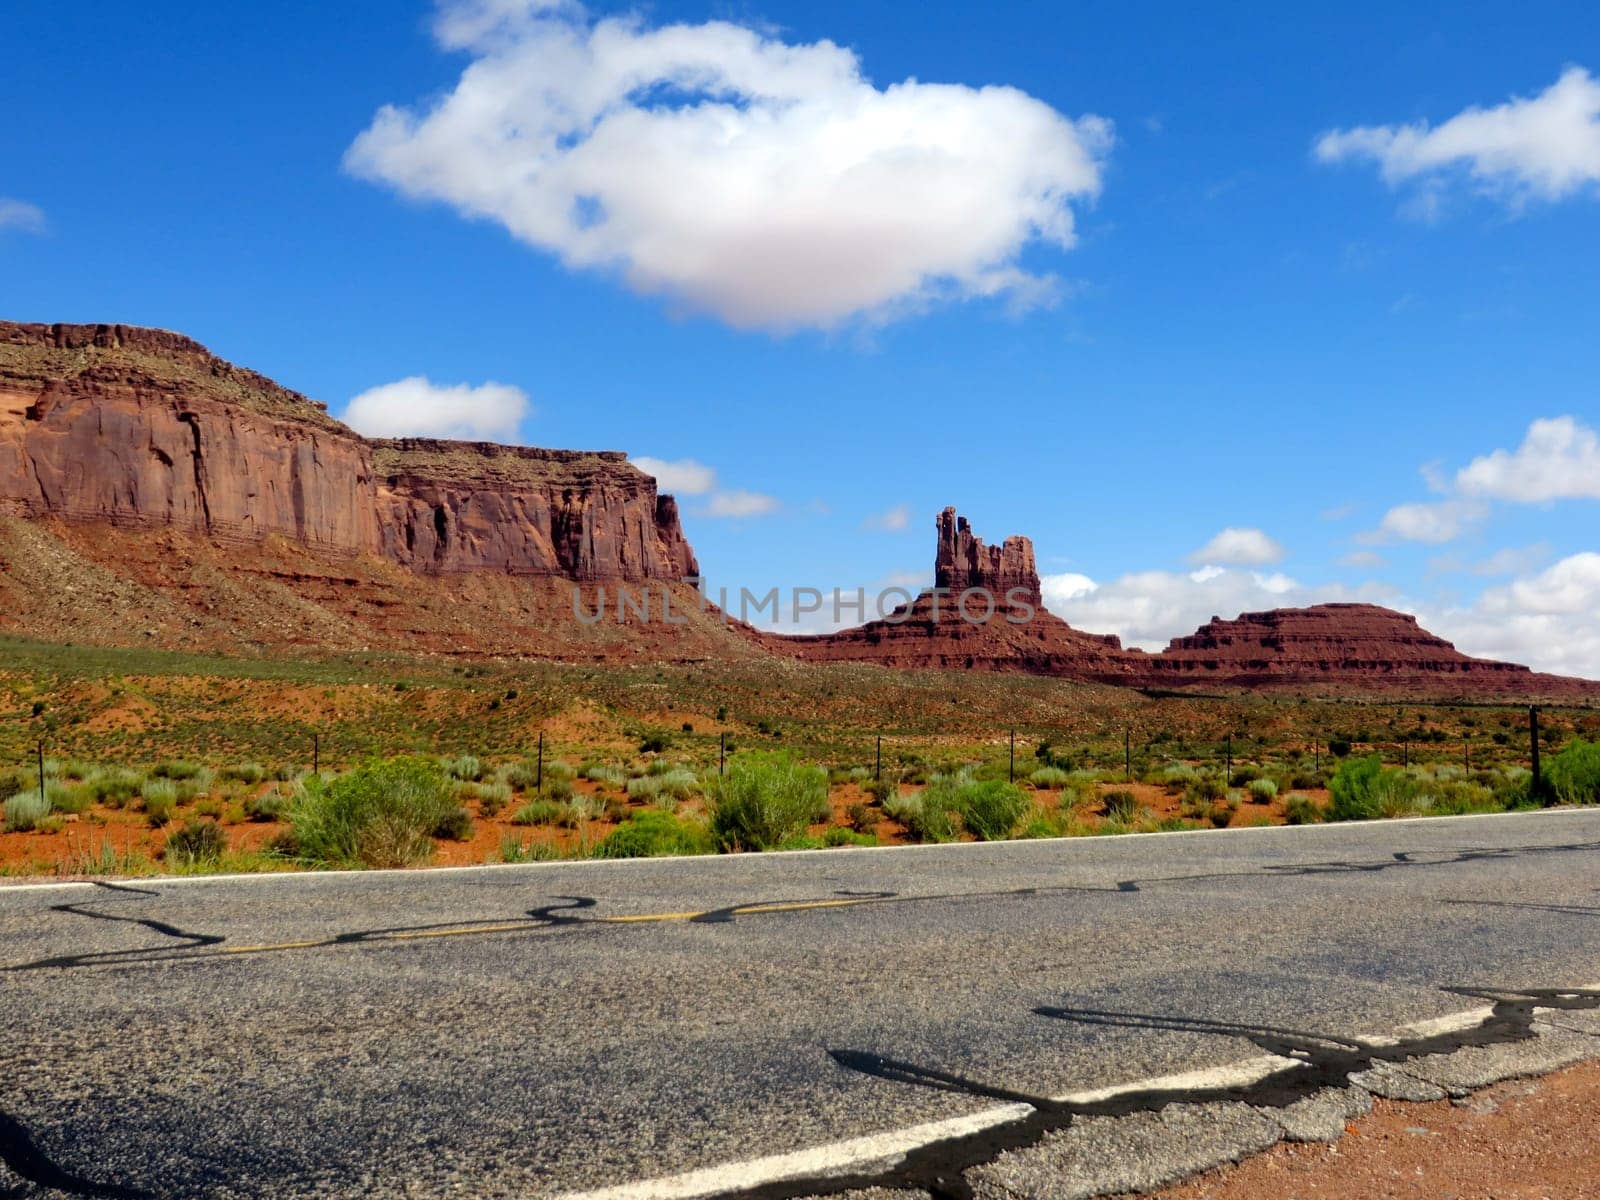 Southwestern Landscape, Rocky Buttes near Monument Valley, Wild West. High quality photo